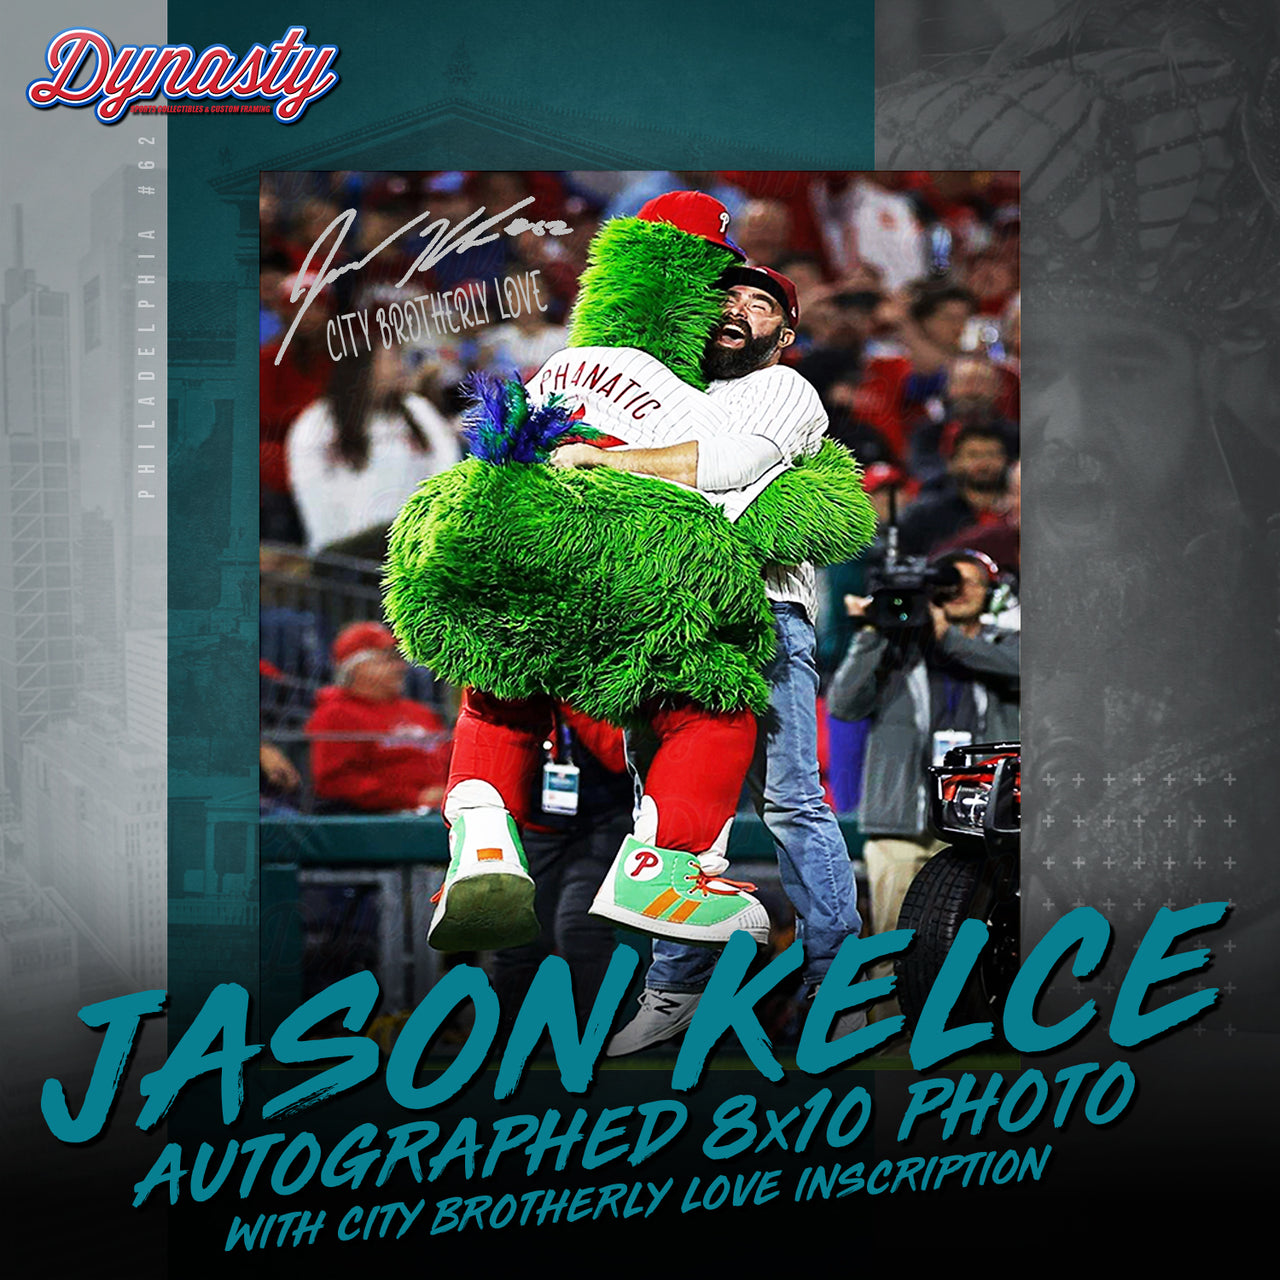 Jason Kelce Celebrates with The Phillie Phanatic NLCS Autographed Photo | Pre-Sale Opportunity - Dynasty Sports & Framing 